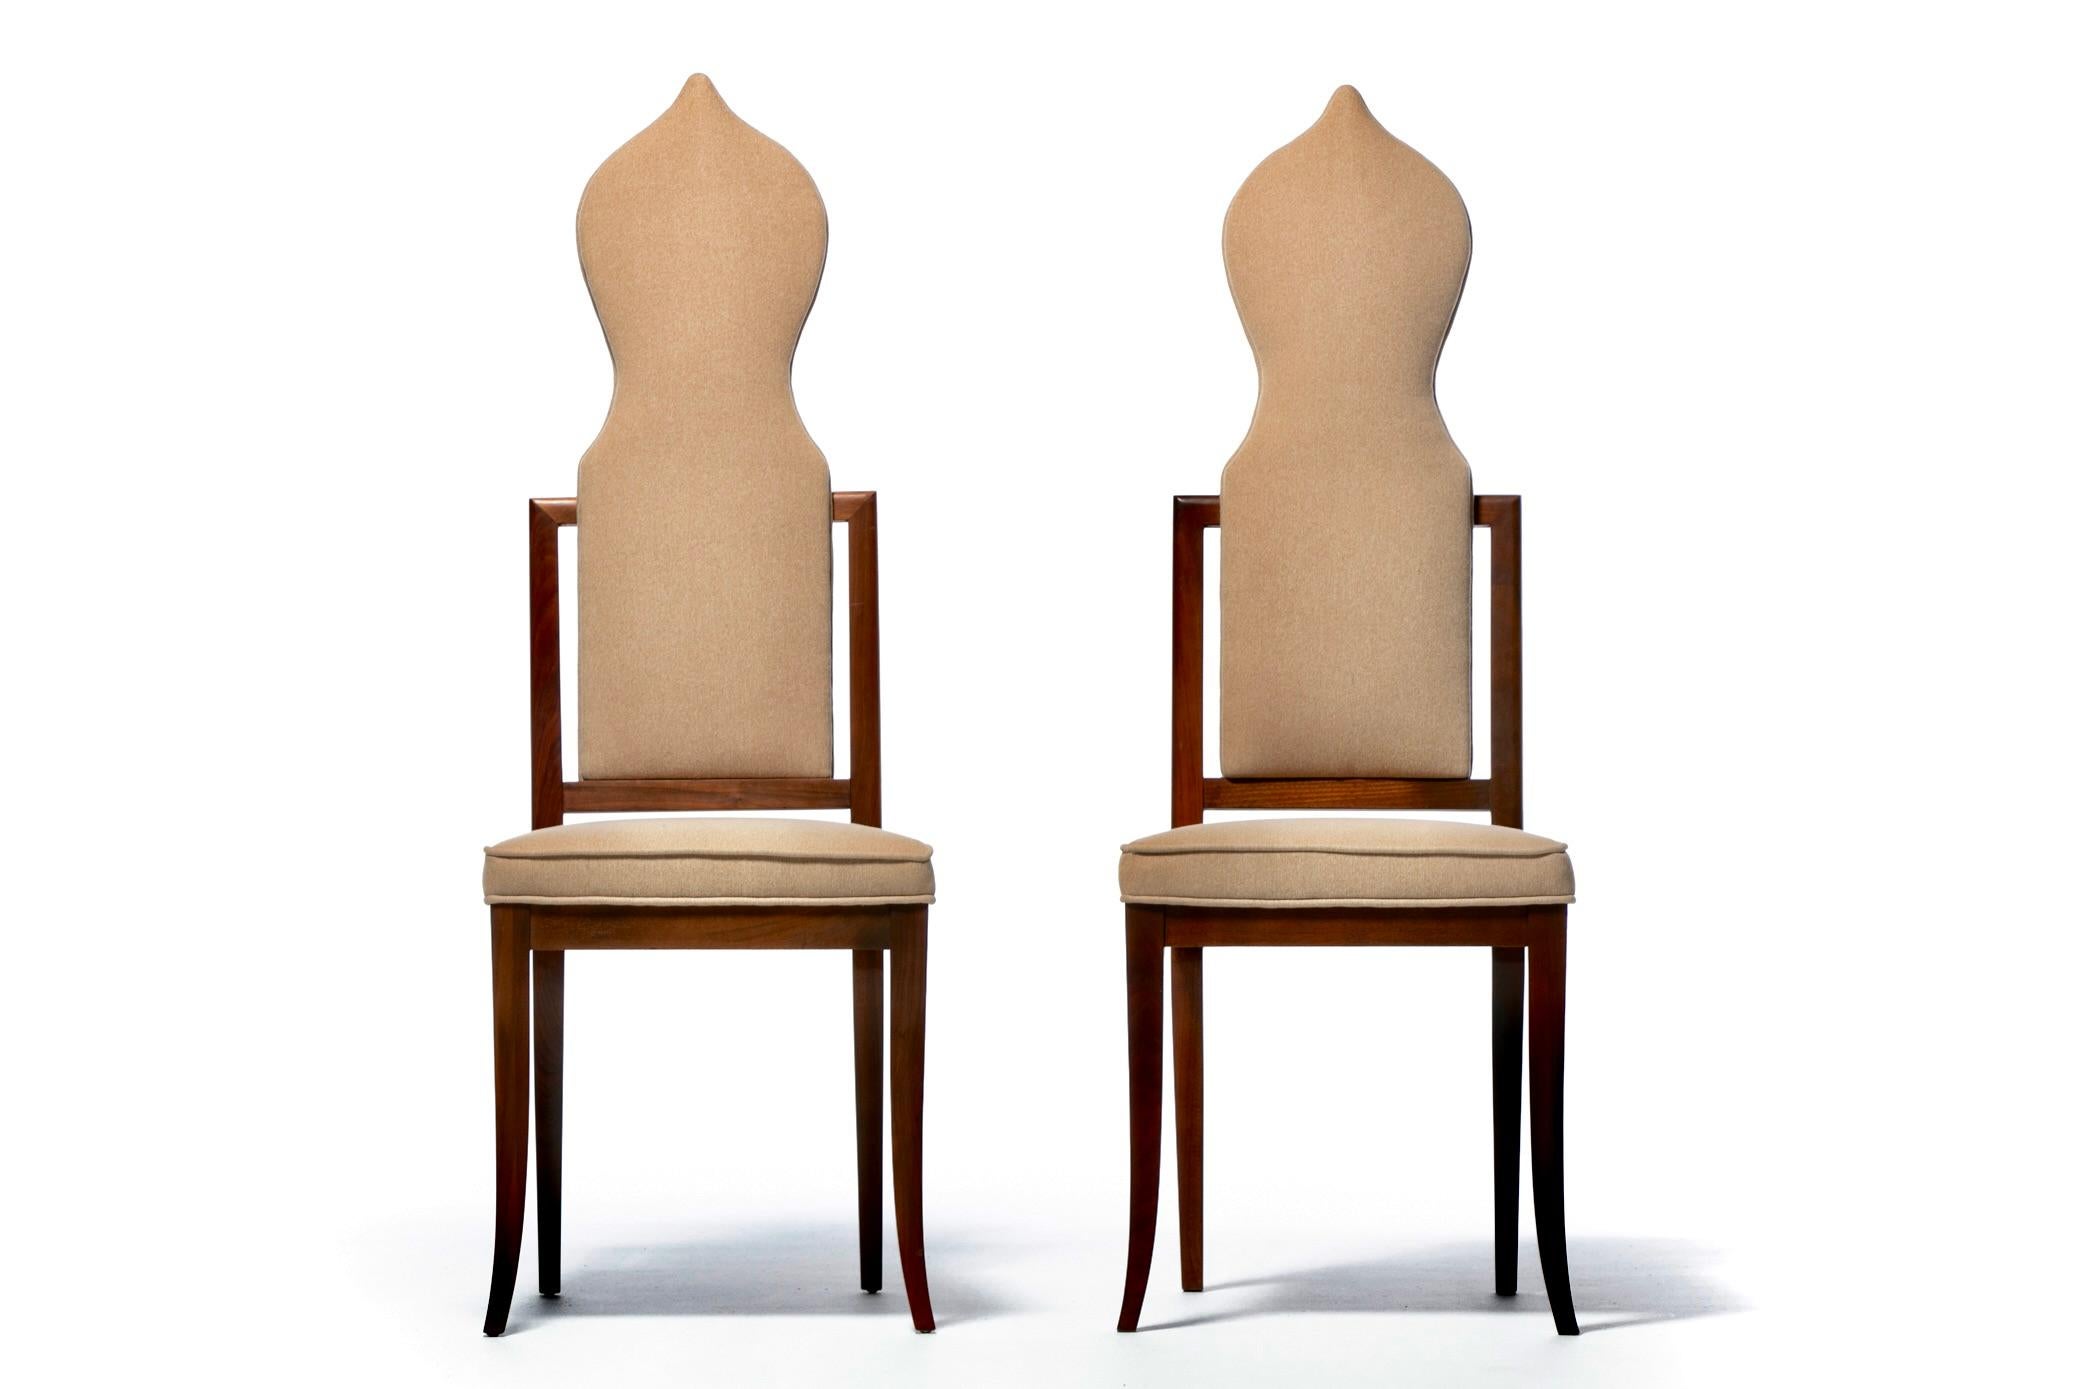 Add up high art and unique sculpture with a sexy Tom Ford dinner party vibe and you get this drop dead gorgeous Set of 14 Tommi Parzinger style Hollywood Regency Walnut Dining Chairs upholstered in soft plush Camel fabric. The profile of this large